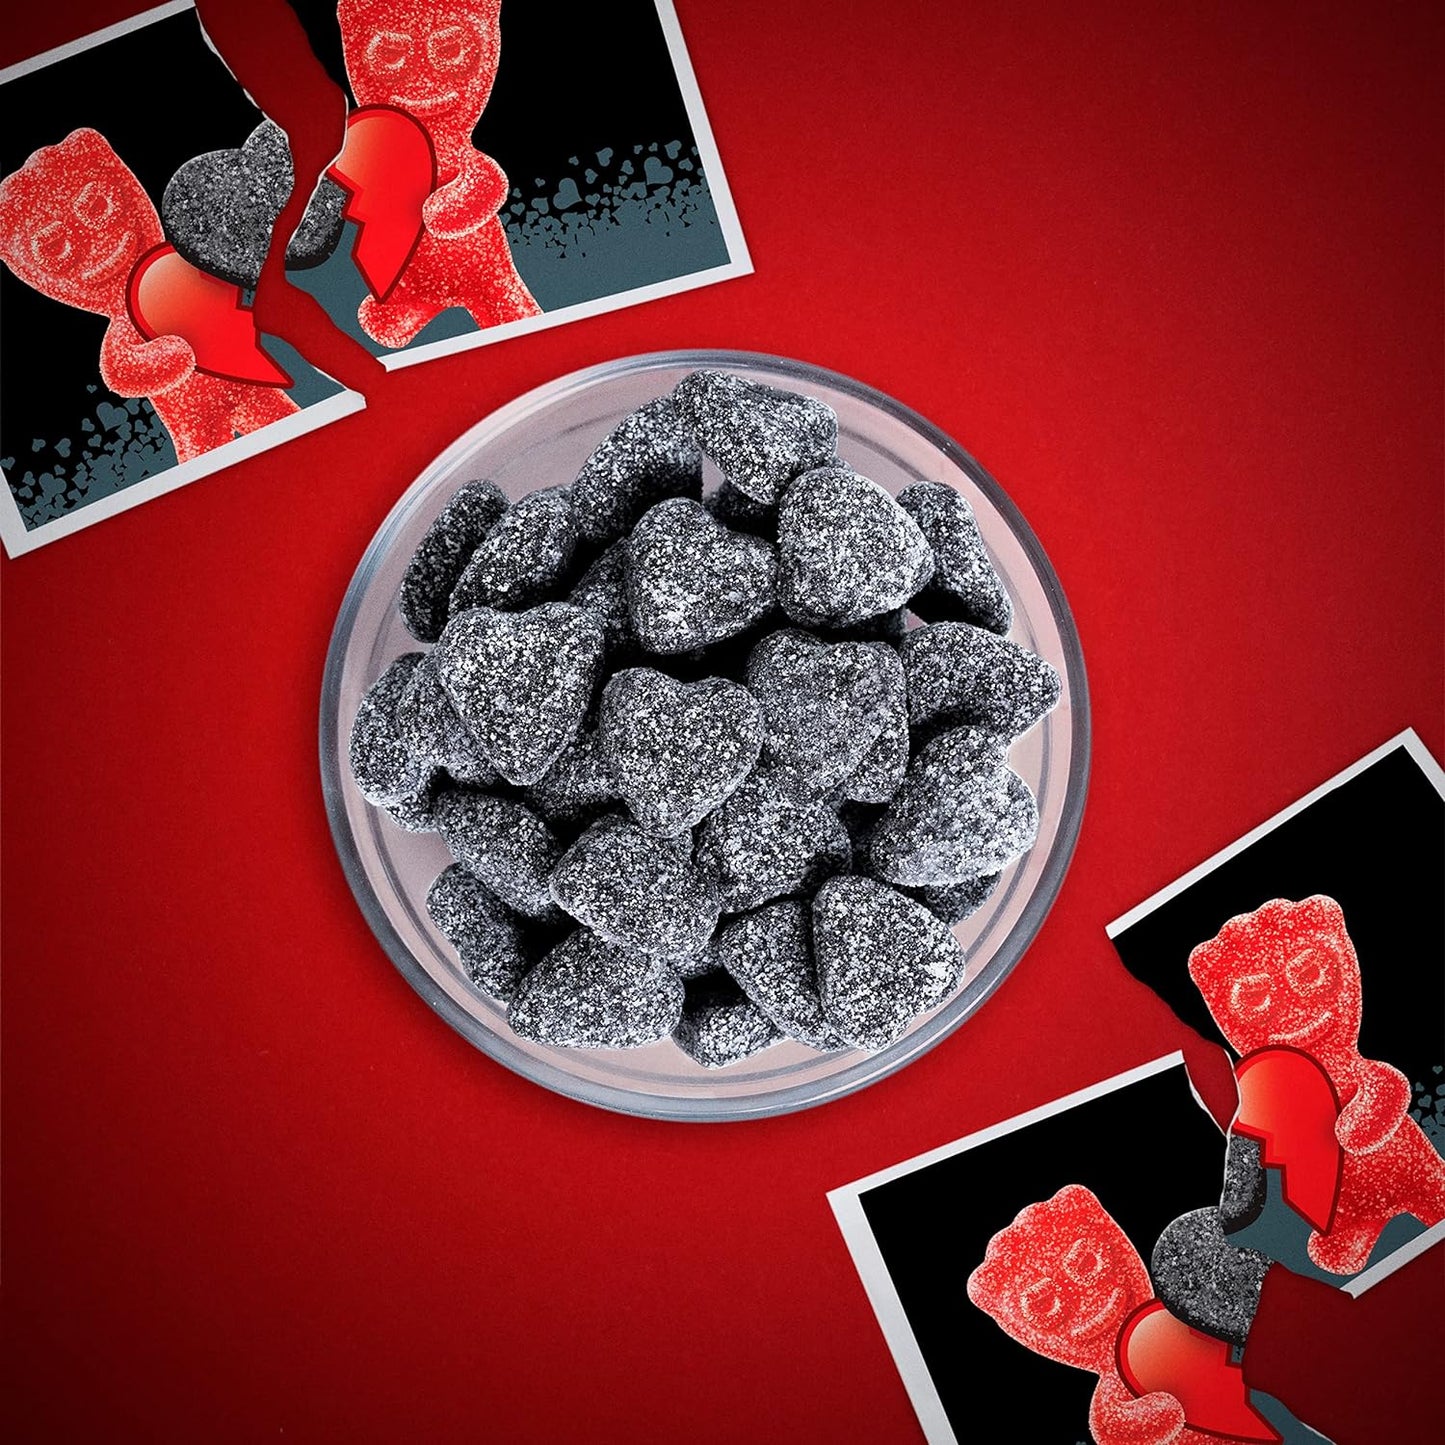 SOUR PATCH KIDS Sour Hearts Black Raspberry Soft & Chewy Candy, Valentines Day Candy, 12 - 3.08 oz Boxes